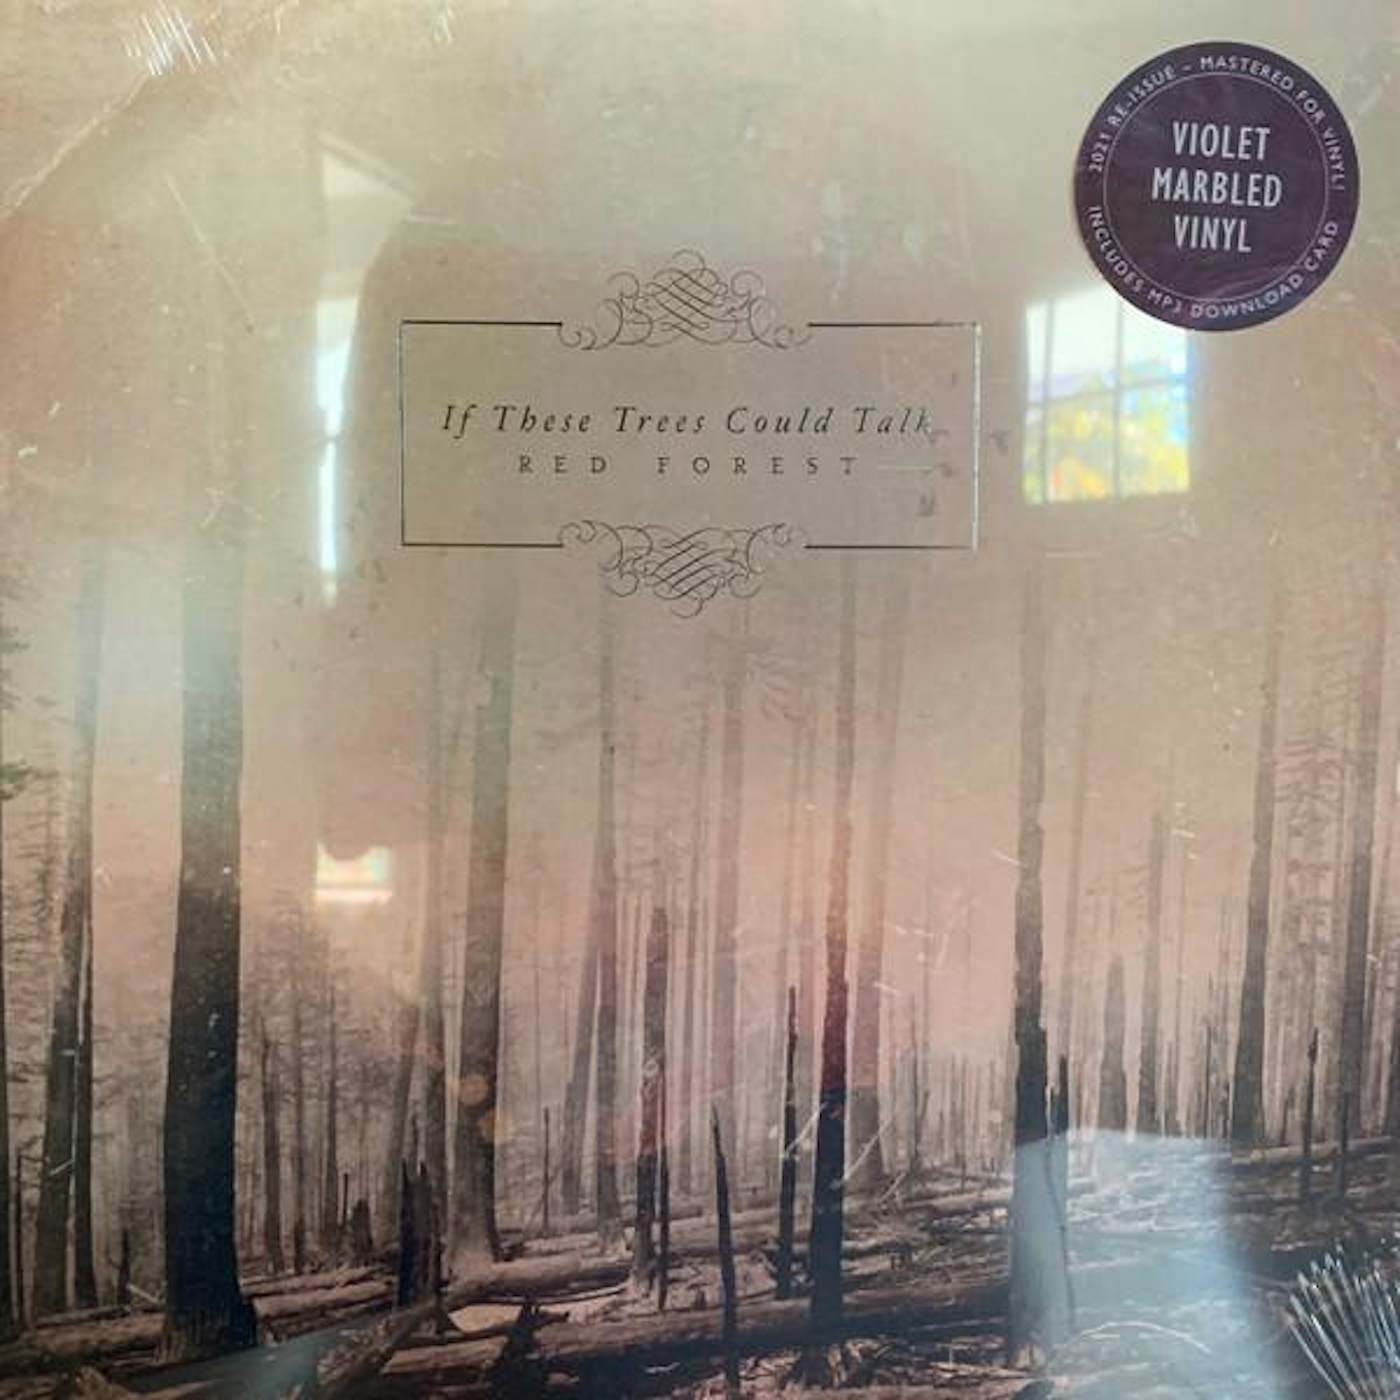 If These Trees Could Talk RED FOREST (VIOLET MARBLE VINYL) Vinyl Record